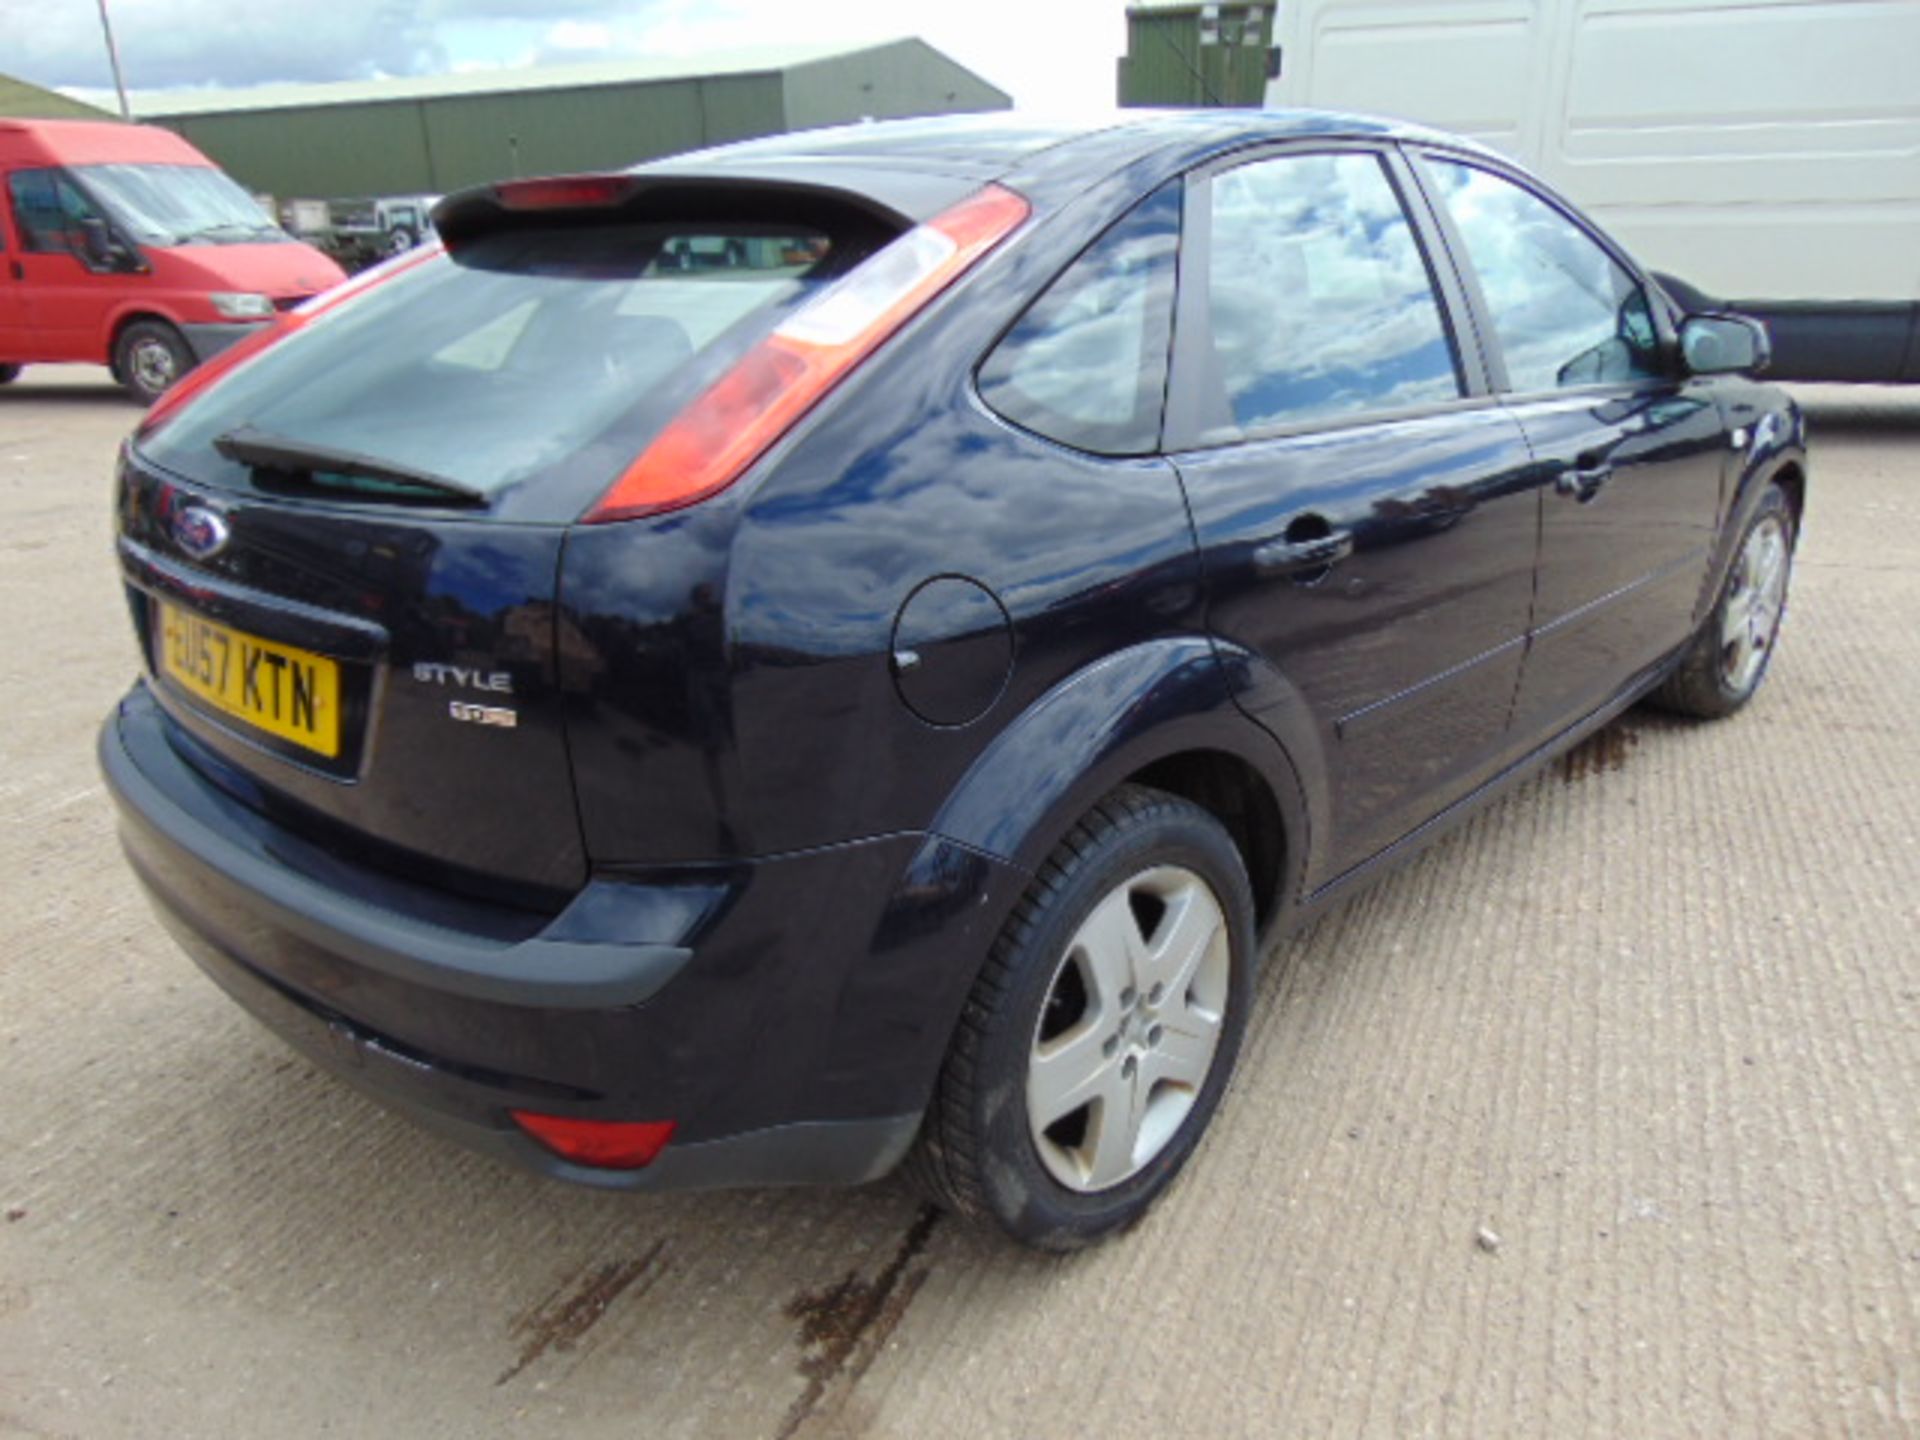 2008 Ford Focus 1.8 TDCI Style Hatchback - Image 6 of 17